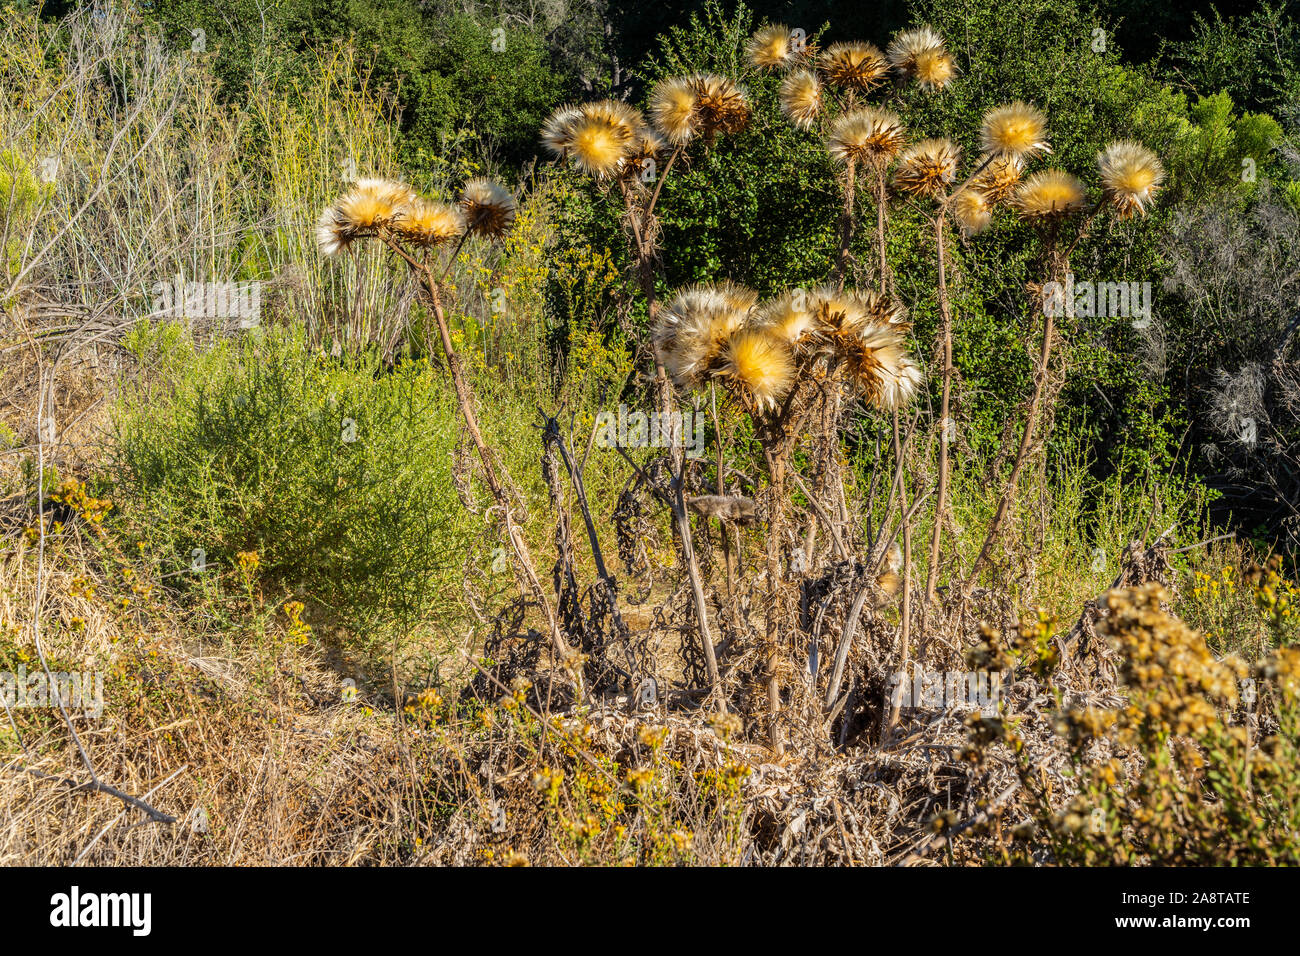 group of thistle plants with seed pods Stock Photo